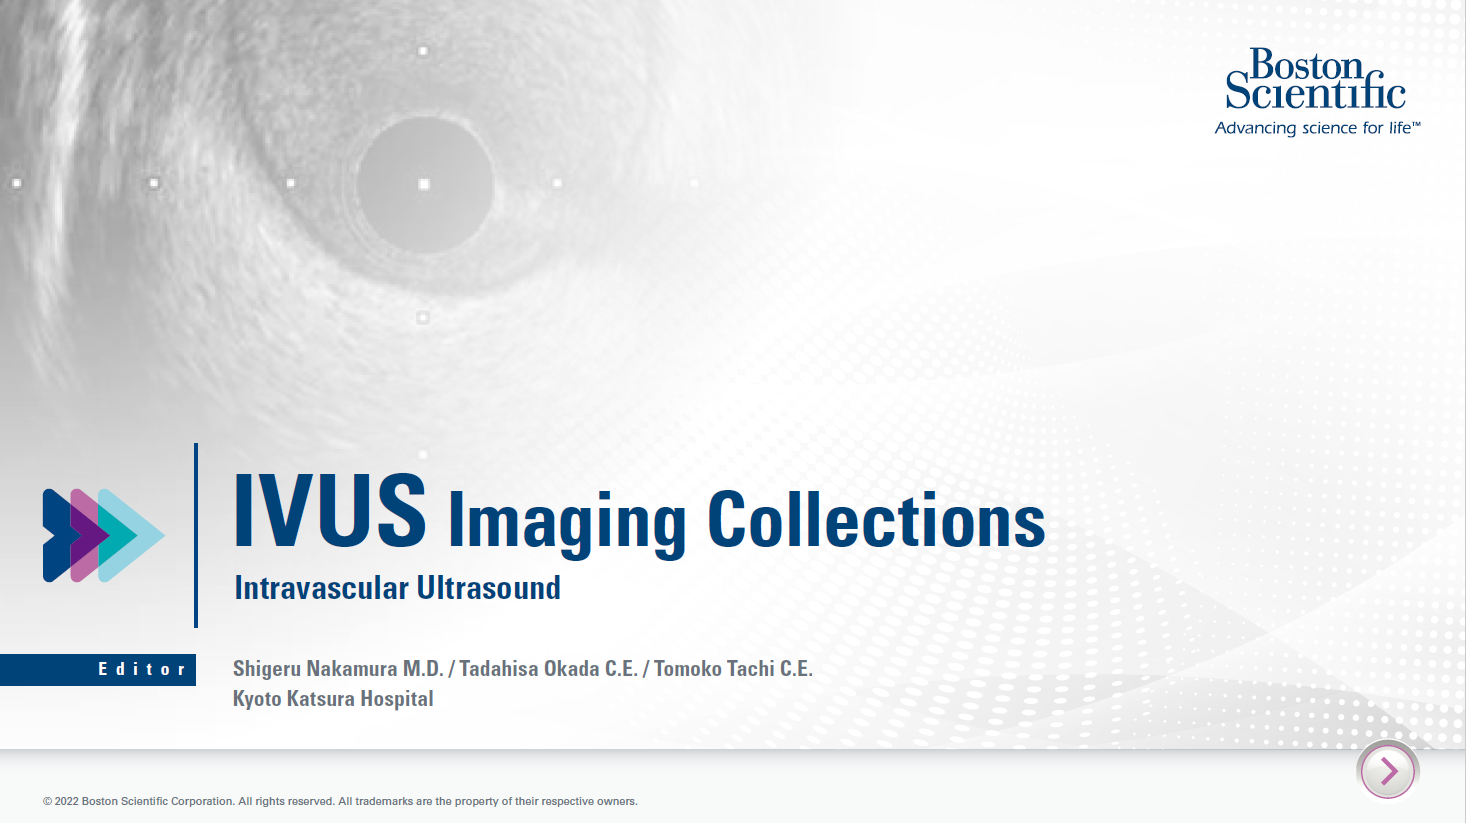 IVUS Imaging Collections